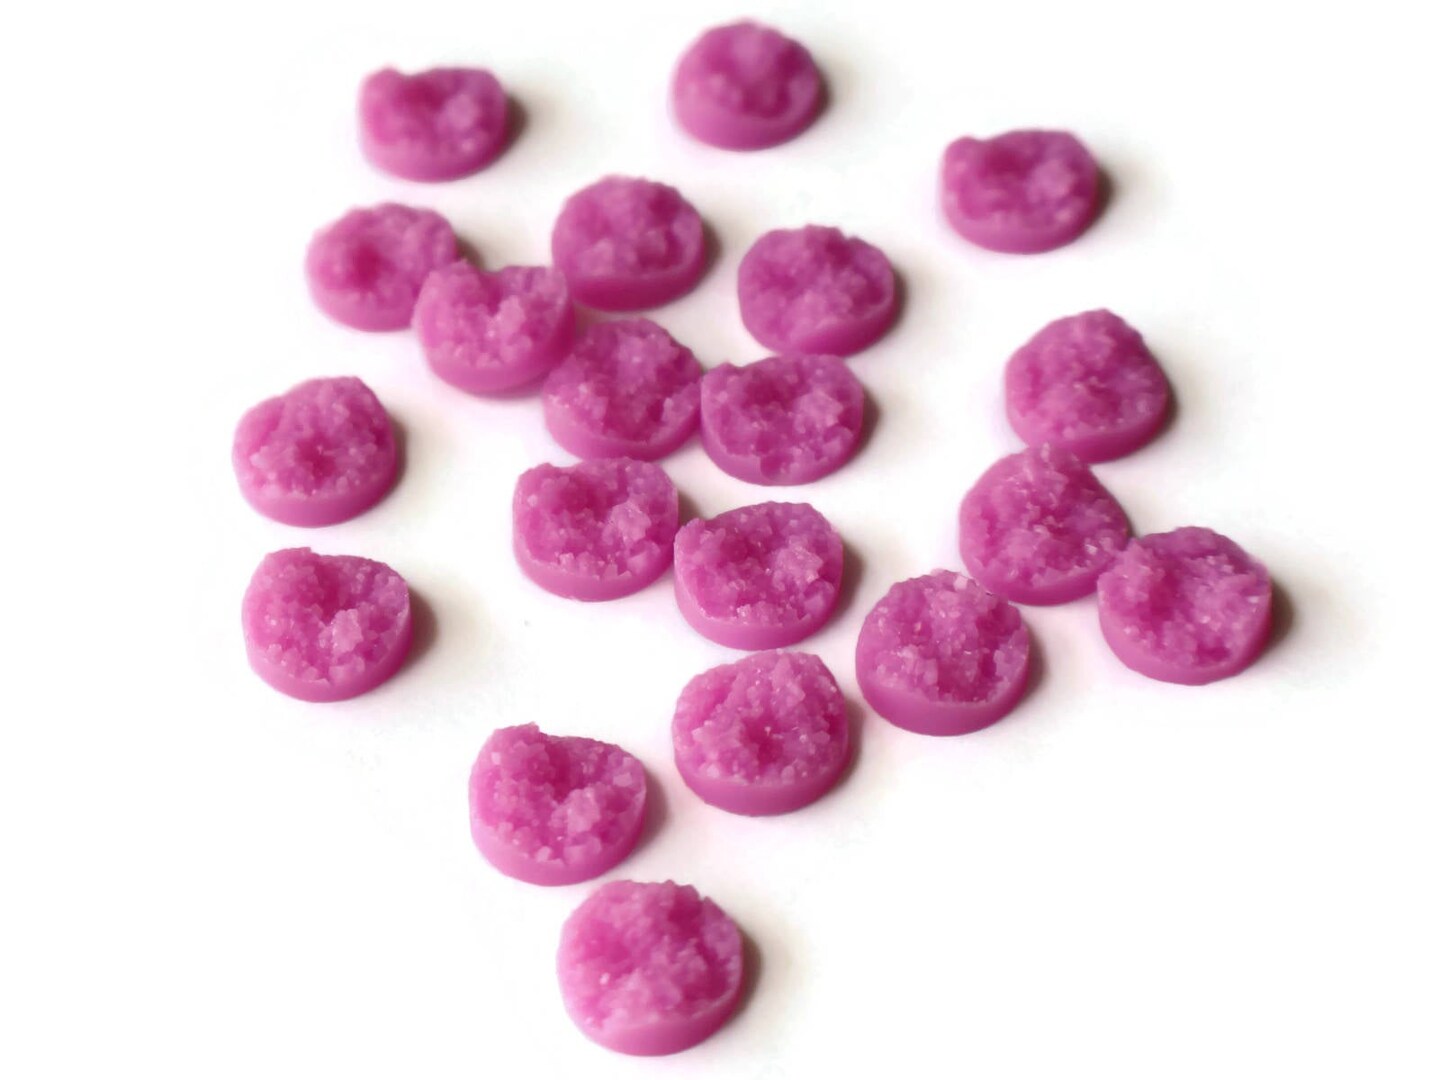 20 12mm Lilac Purple Round Resin Druzy Cabochons